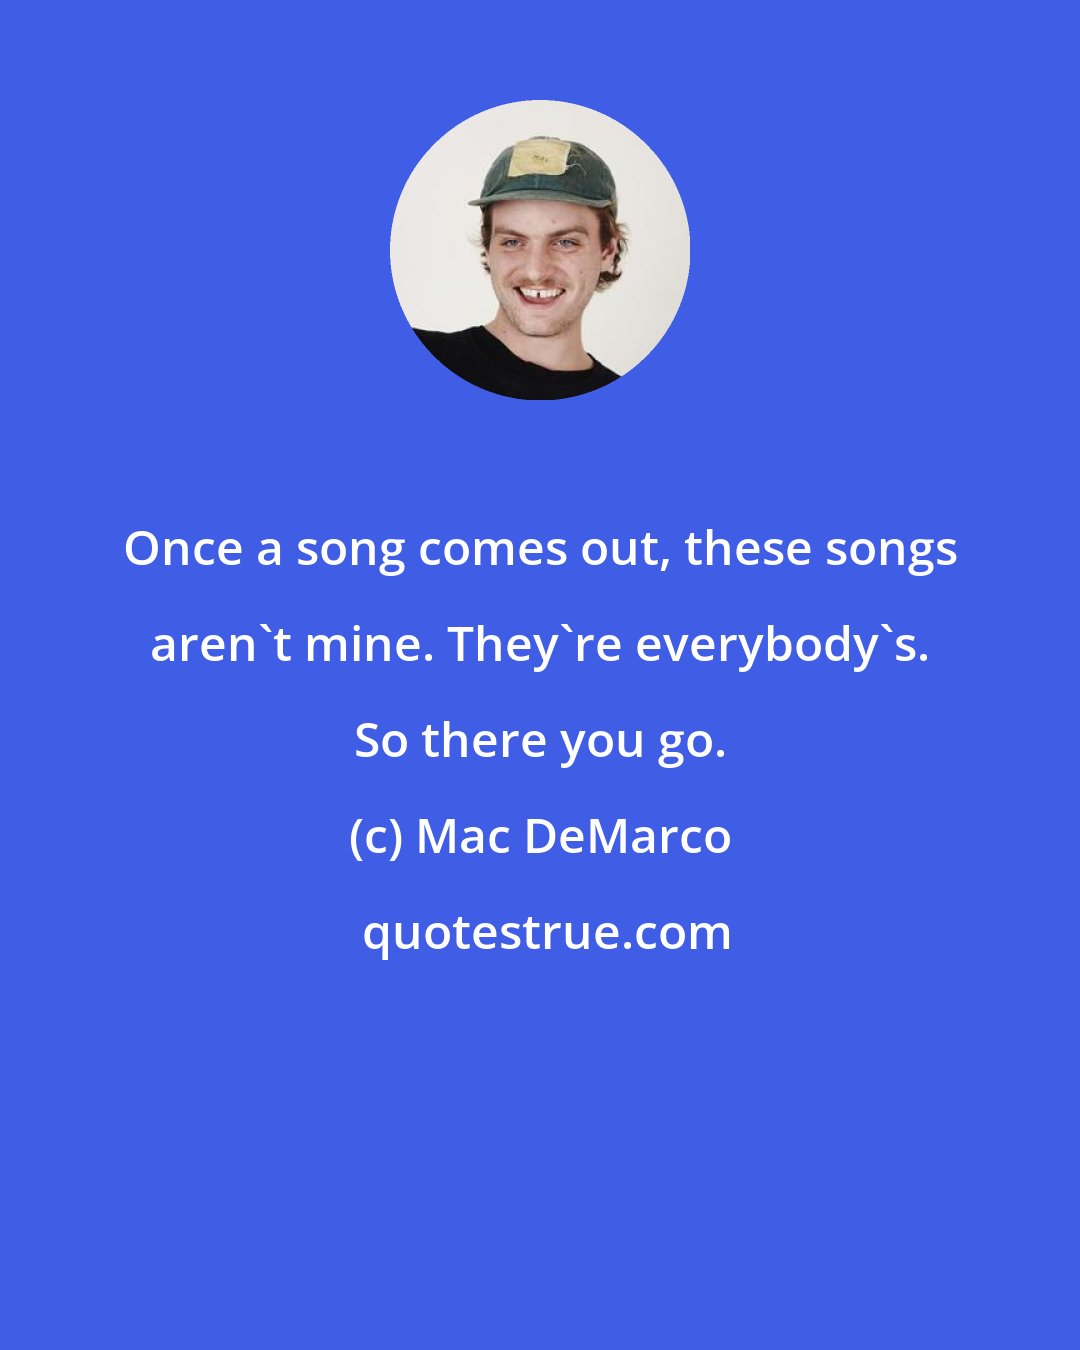 Mac DeMarco: Once a song comes out, these songs aren't mine. They're everybody's. So there you go.